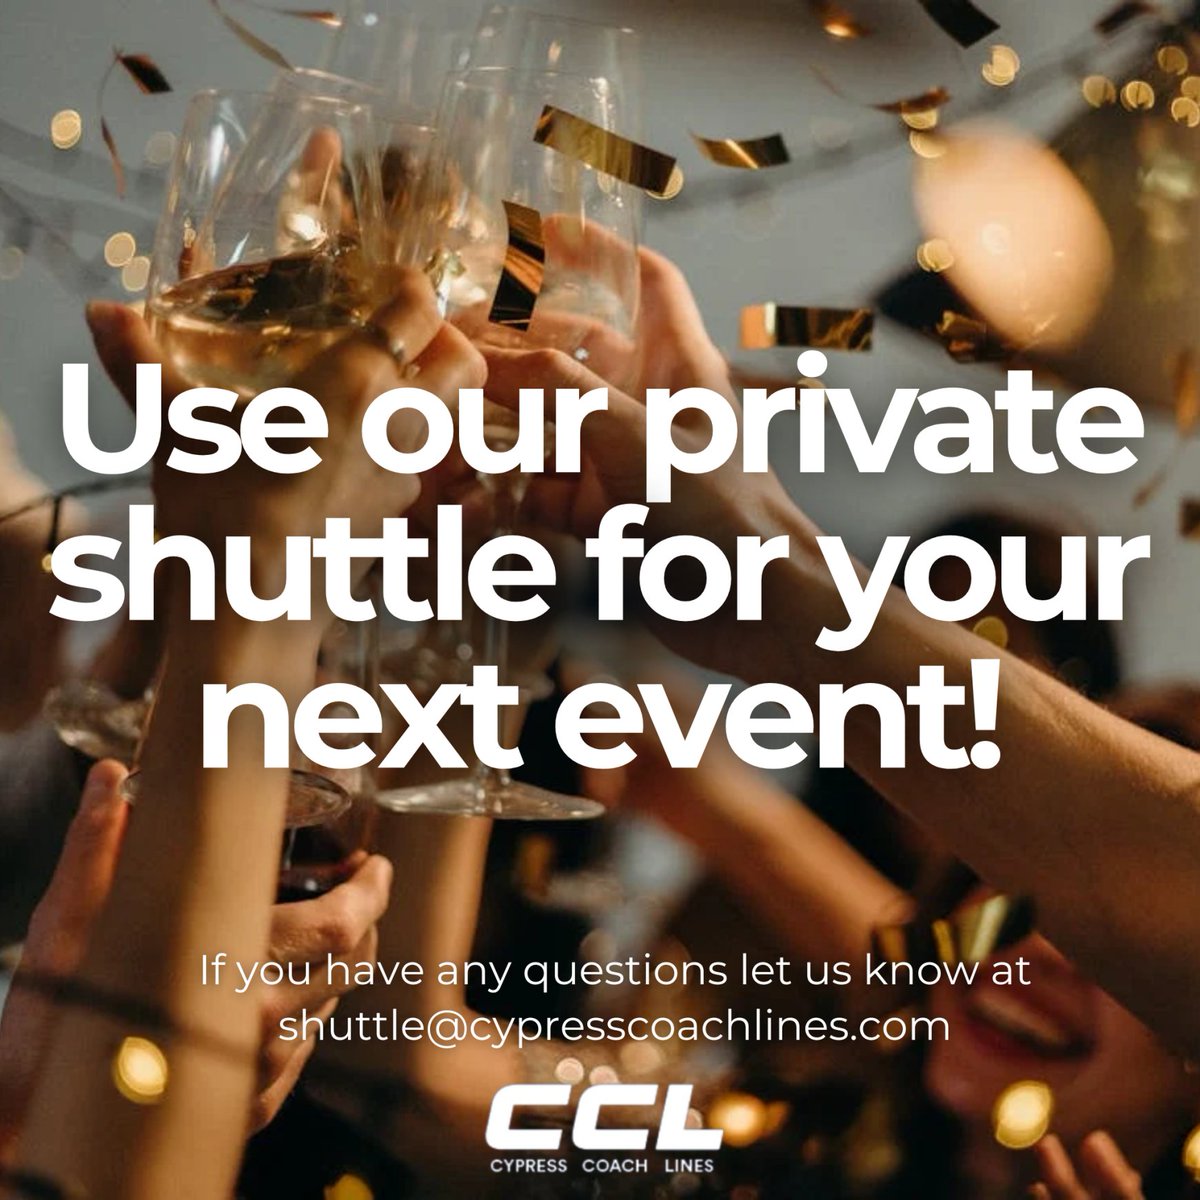 Don't let transportation be a bother! #CypressCoachLines offers private shuttles for you and your event. 😉🎉

BOOK ONLINE TODAY! bit.ly/3Inqoyw

#bus #bustrip #vancouver #travelsafe #nature #tourism #vancouvertourism